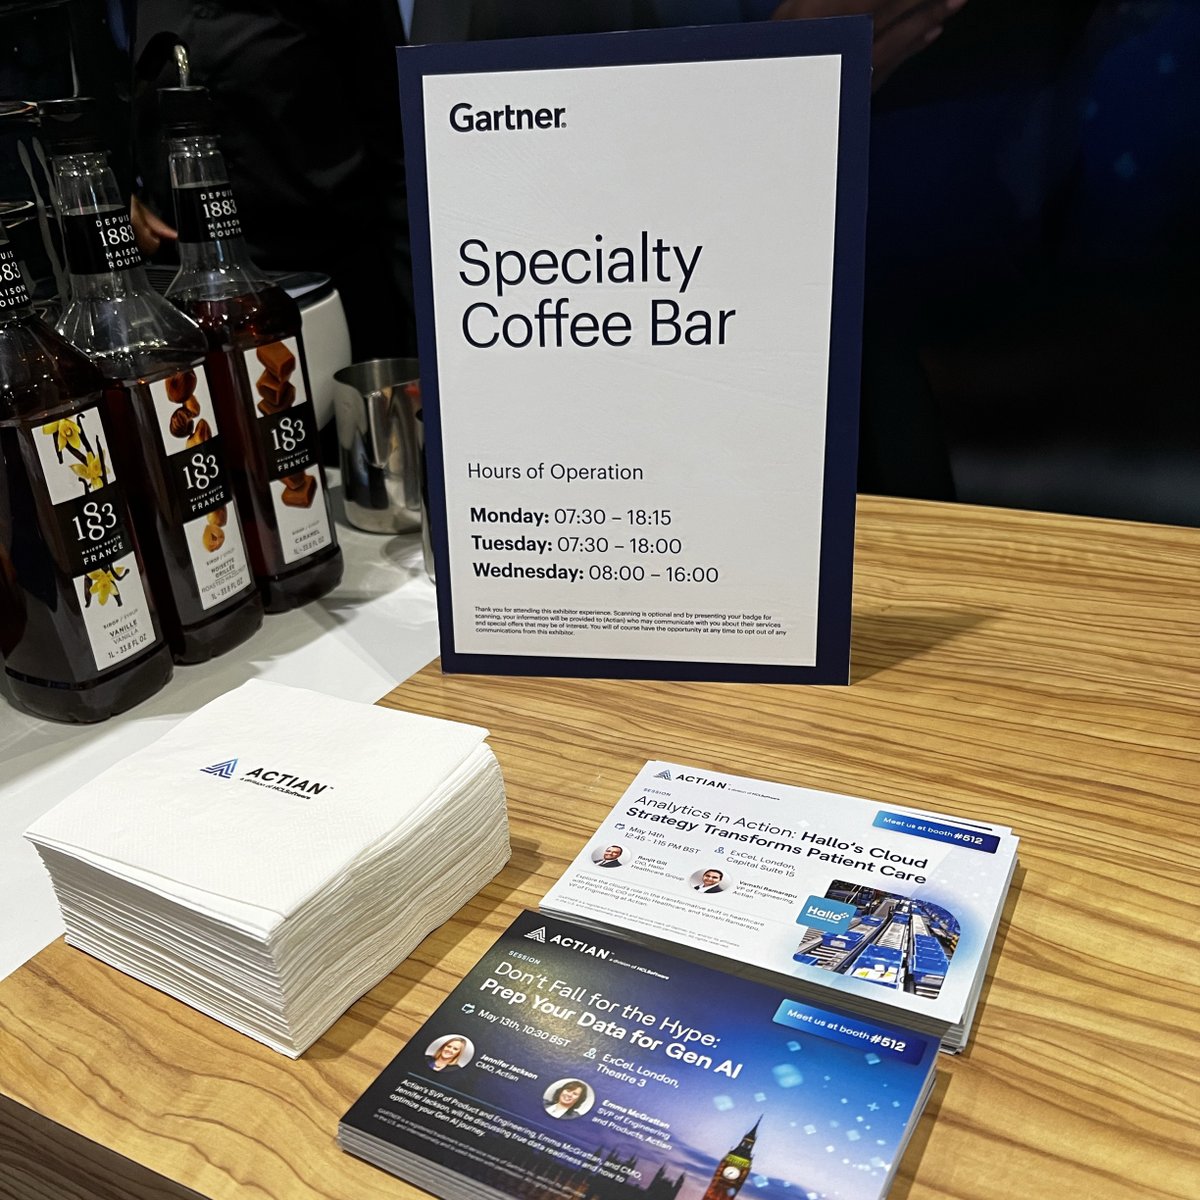 We’re here at the Gartner® Data & Analytics Summit in #London and excited about our session today on how to truly be #GenAI ready. Meet us there!

Make sure to stop by our coffee bar and visit booth #512 for a live 1:1 demo.

Learn More bit.ly/3UxhjLv
#Gartner #GartnerDA